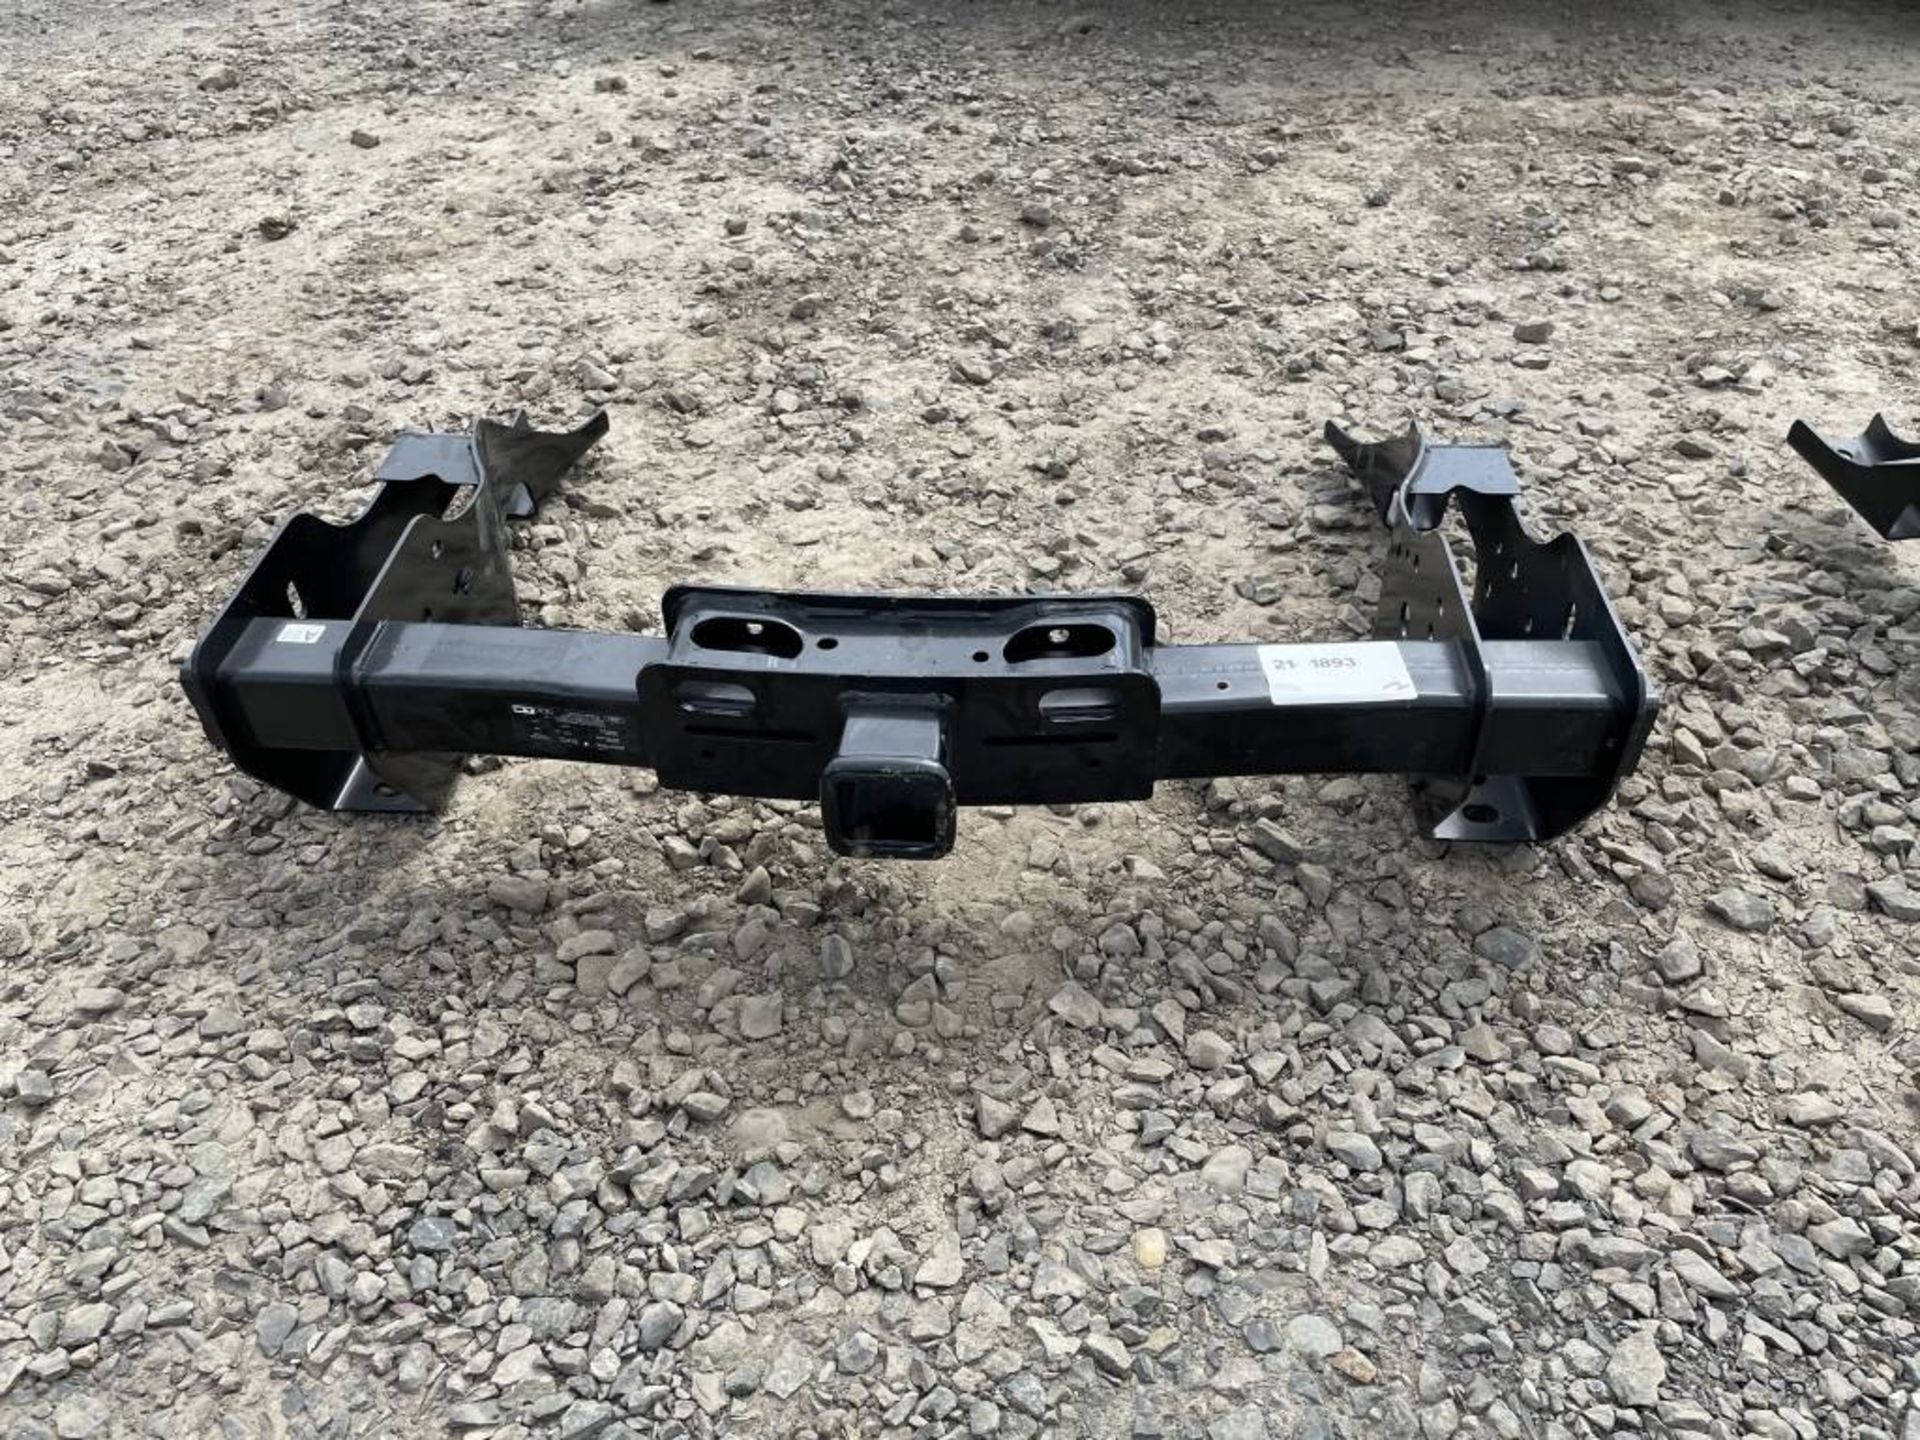 Ford Hitch Receiver